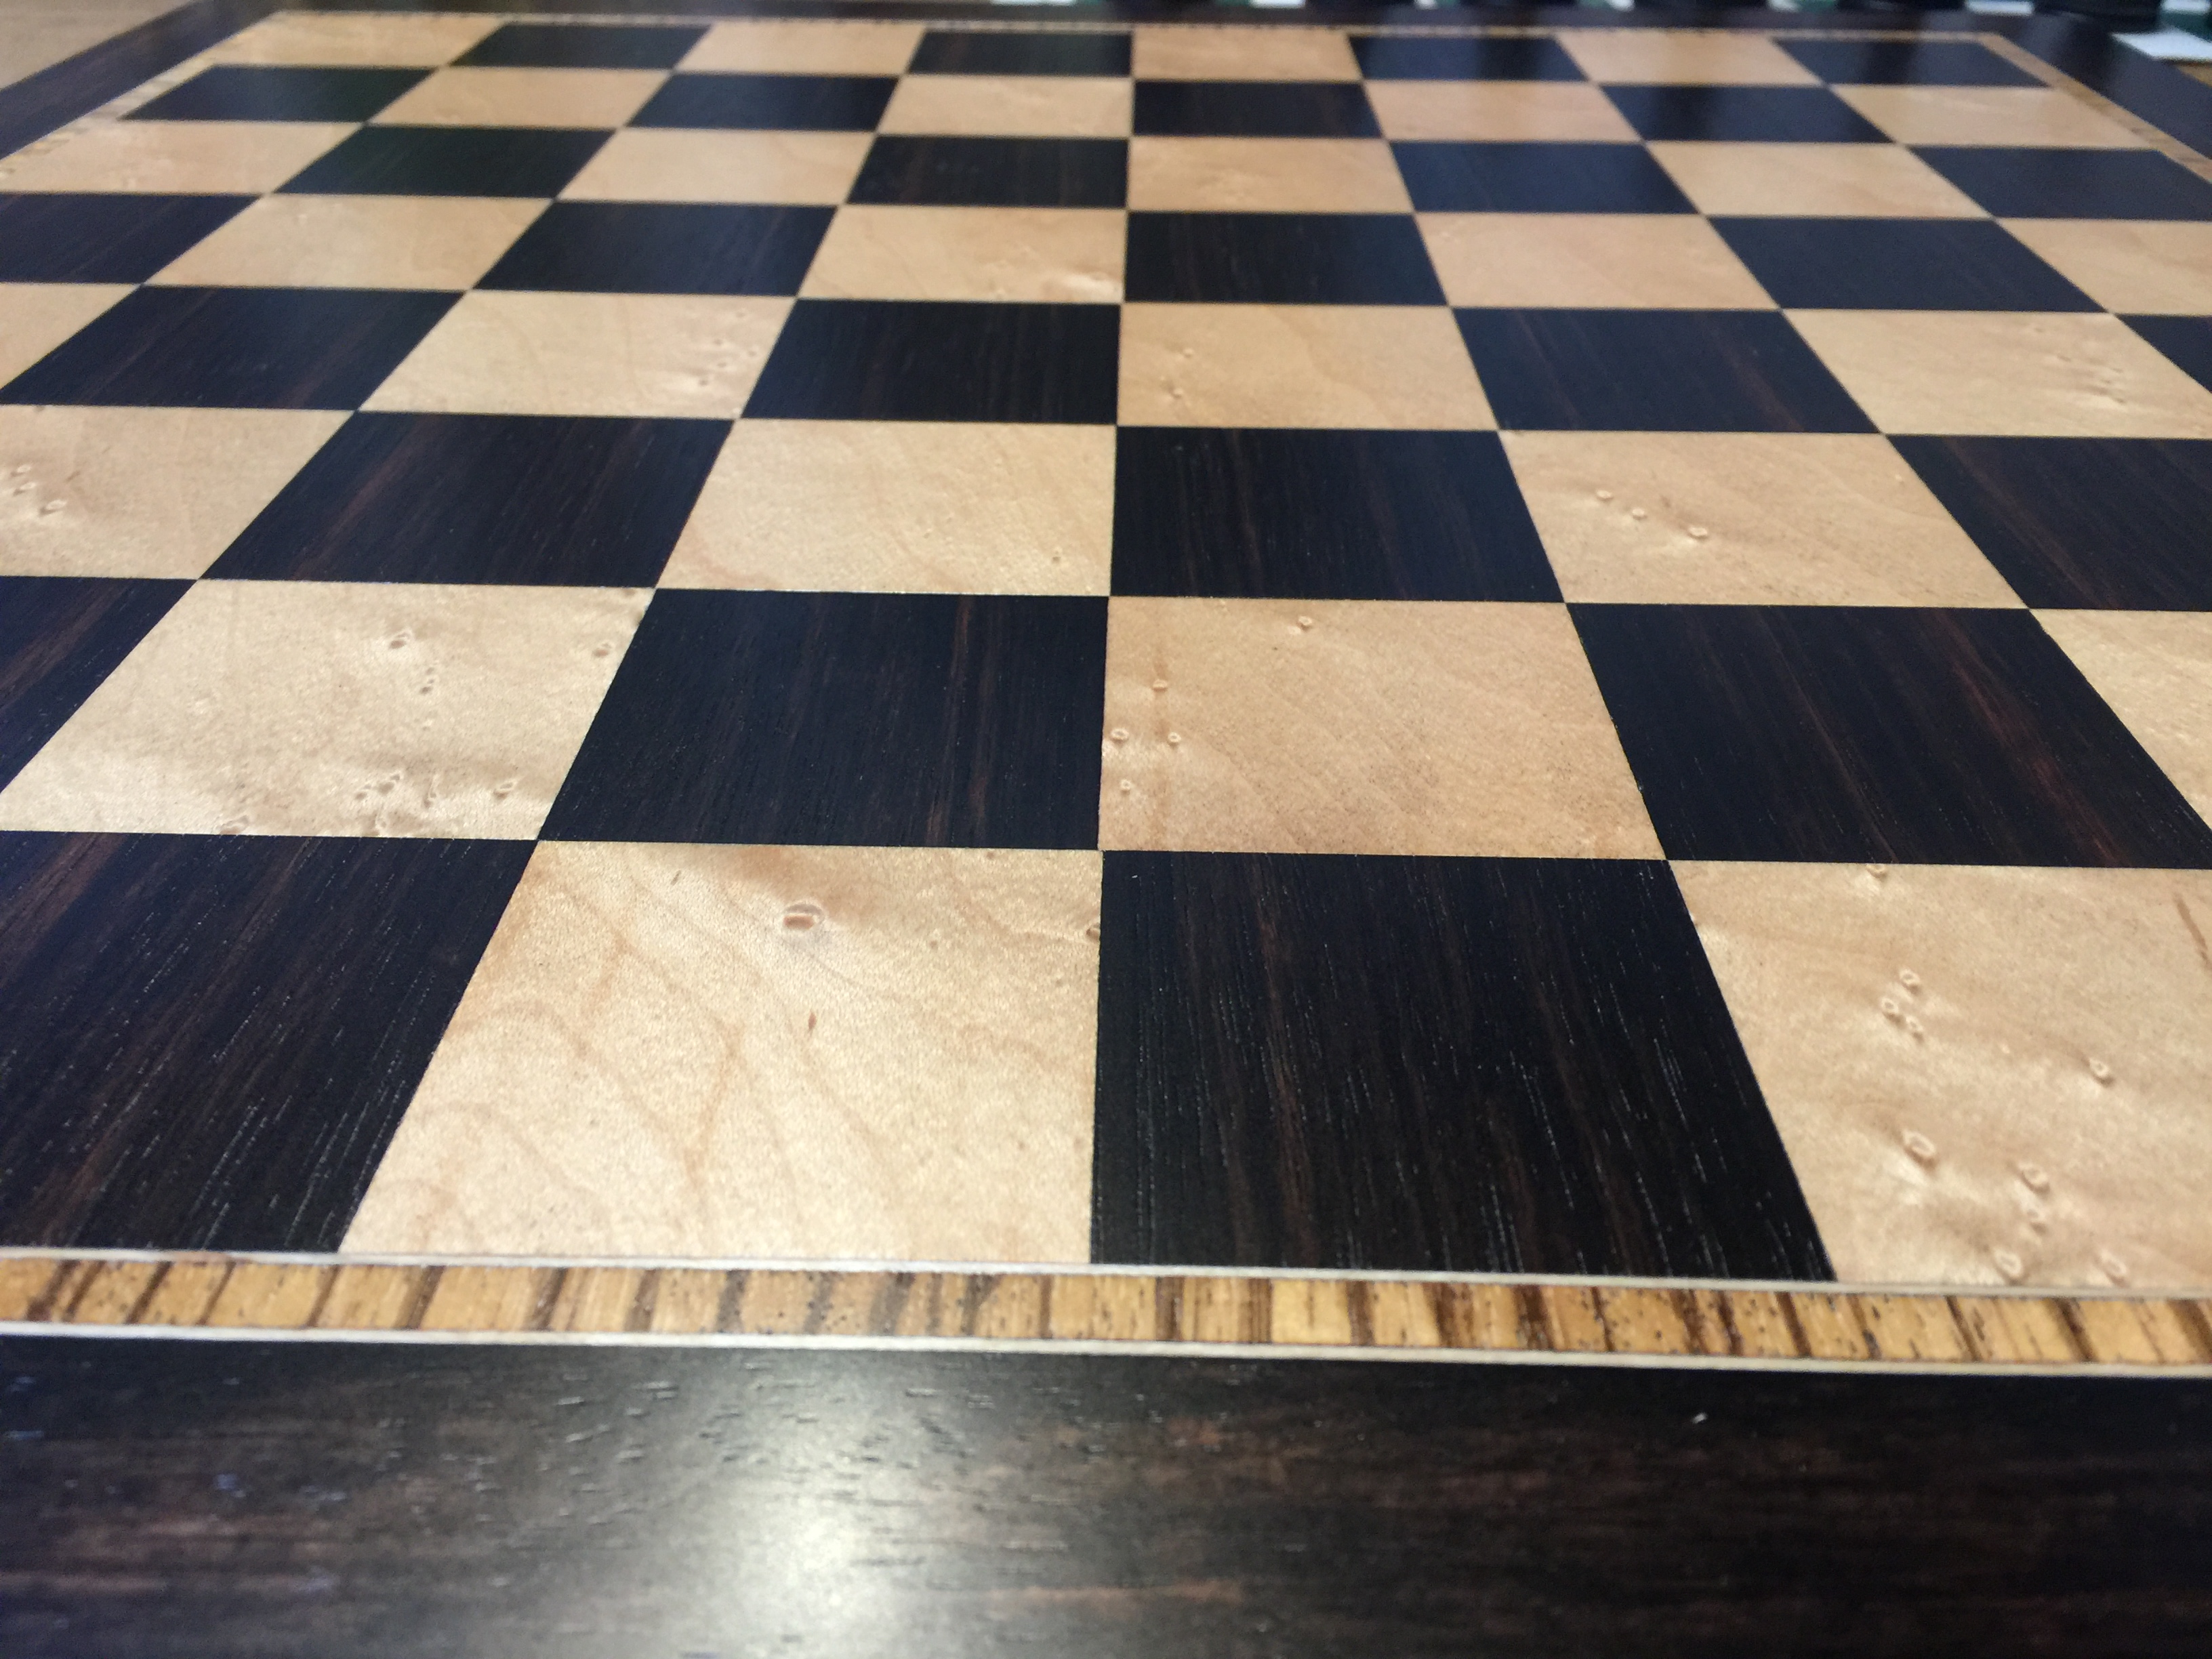 Stained Black Chess Board with Inlay and 2.25